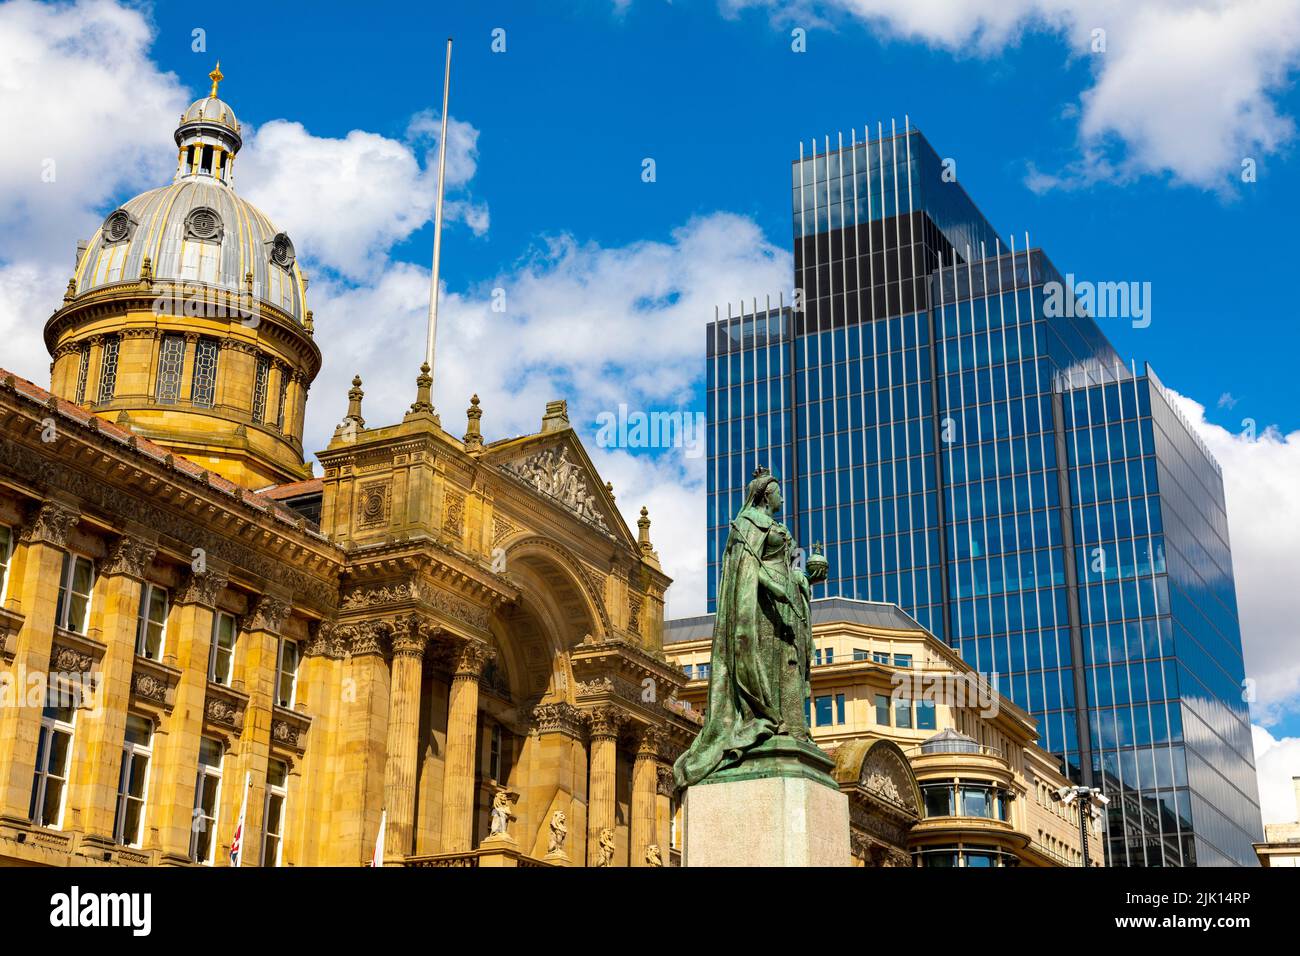 Old and modern architecture, Council House, Victoria Square, Birmingham, England, United Kingdom, Europe Stock Photo